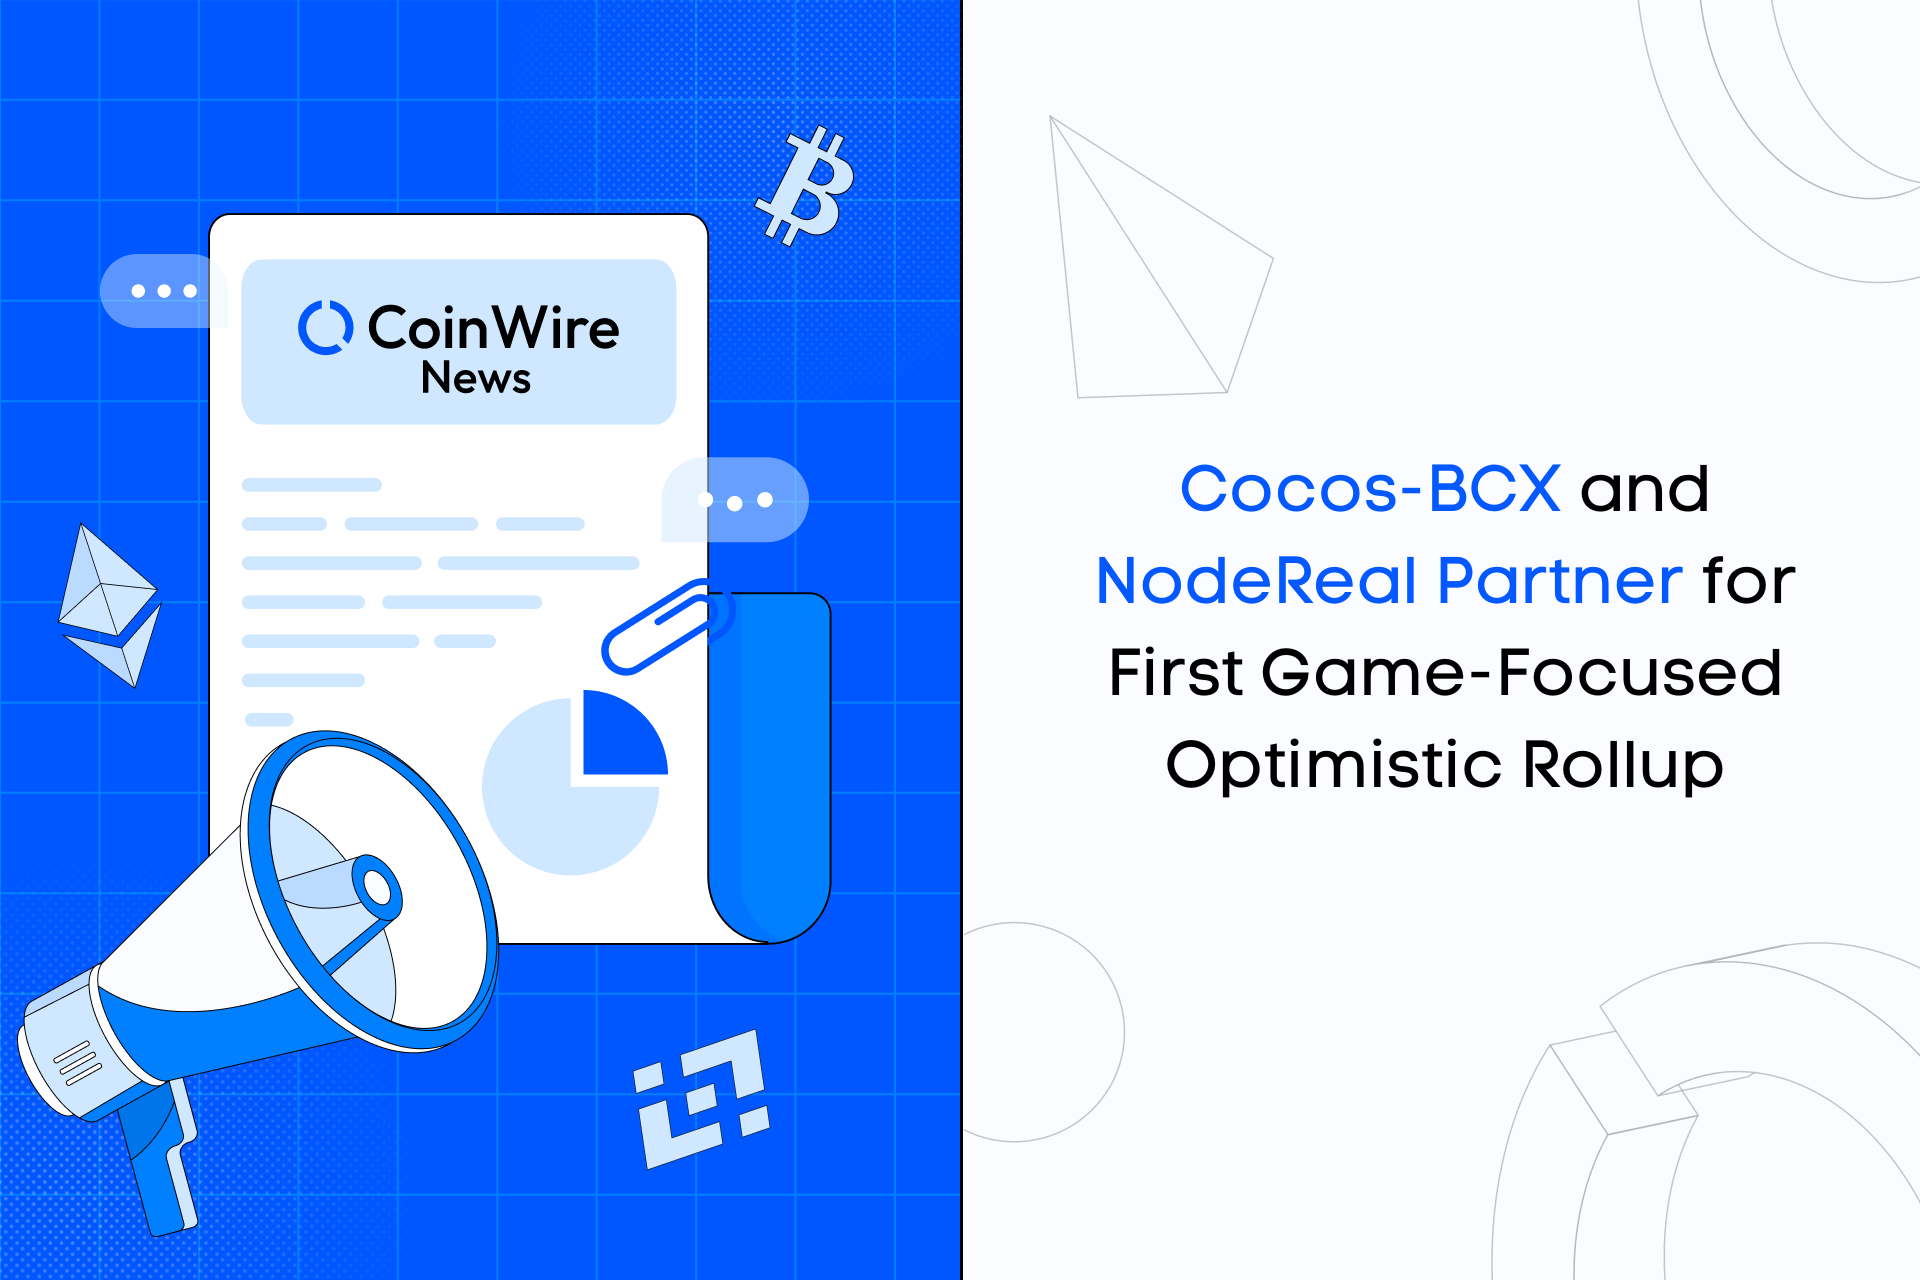 Cocos-Bcx And Nodereal Partner For First Game-Focused Optimistic Rollup